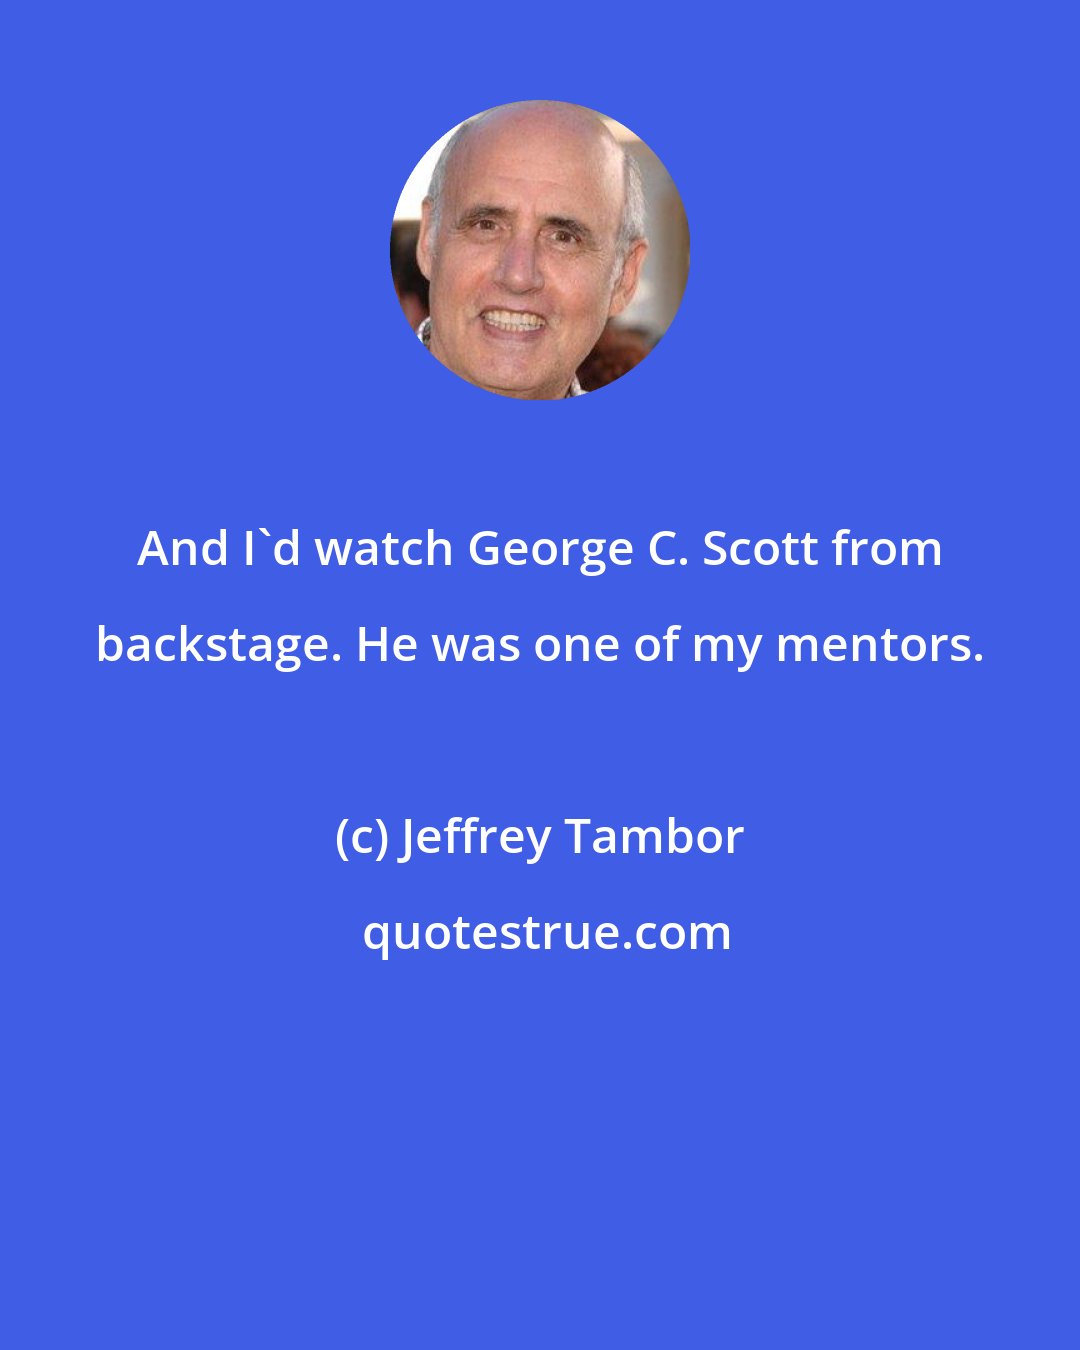 Jeffrey Tambor: And I'd watch George C. Scott from backstage. He was one of my mentors.